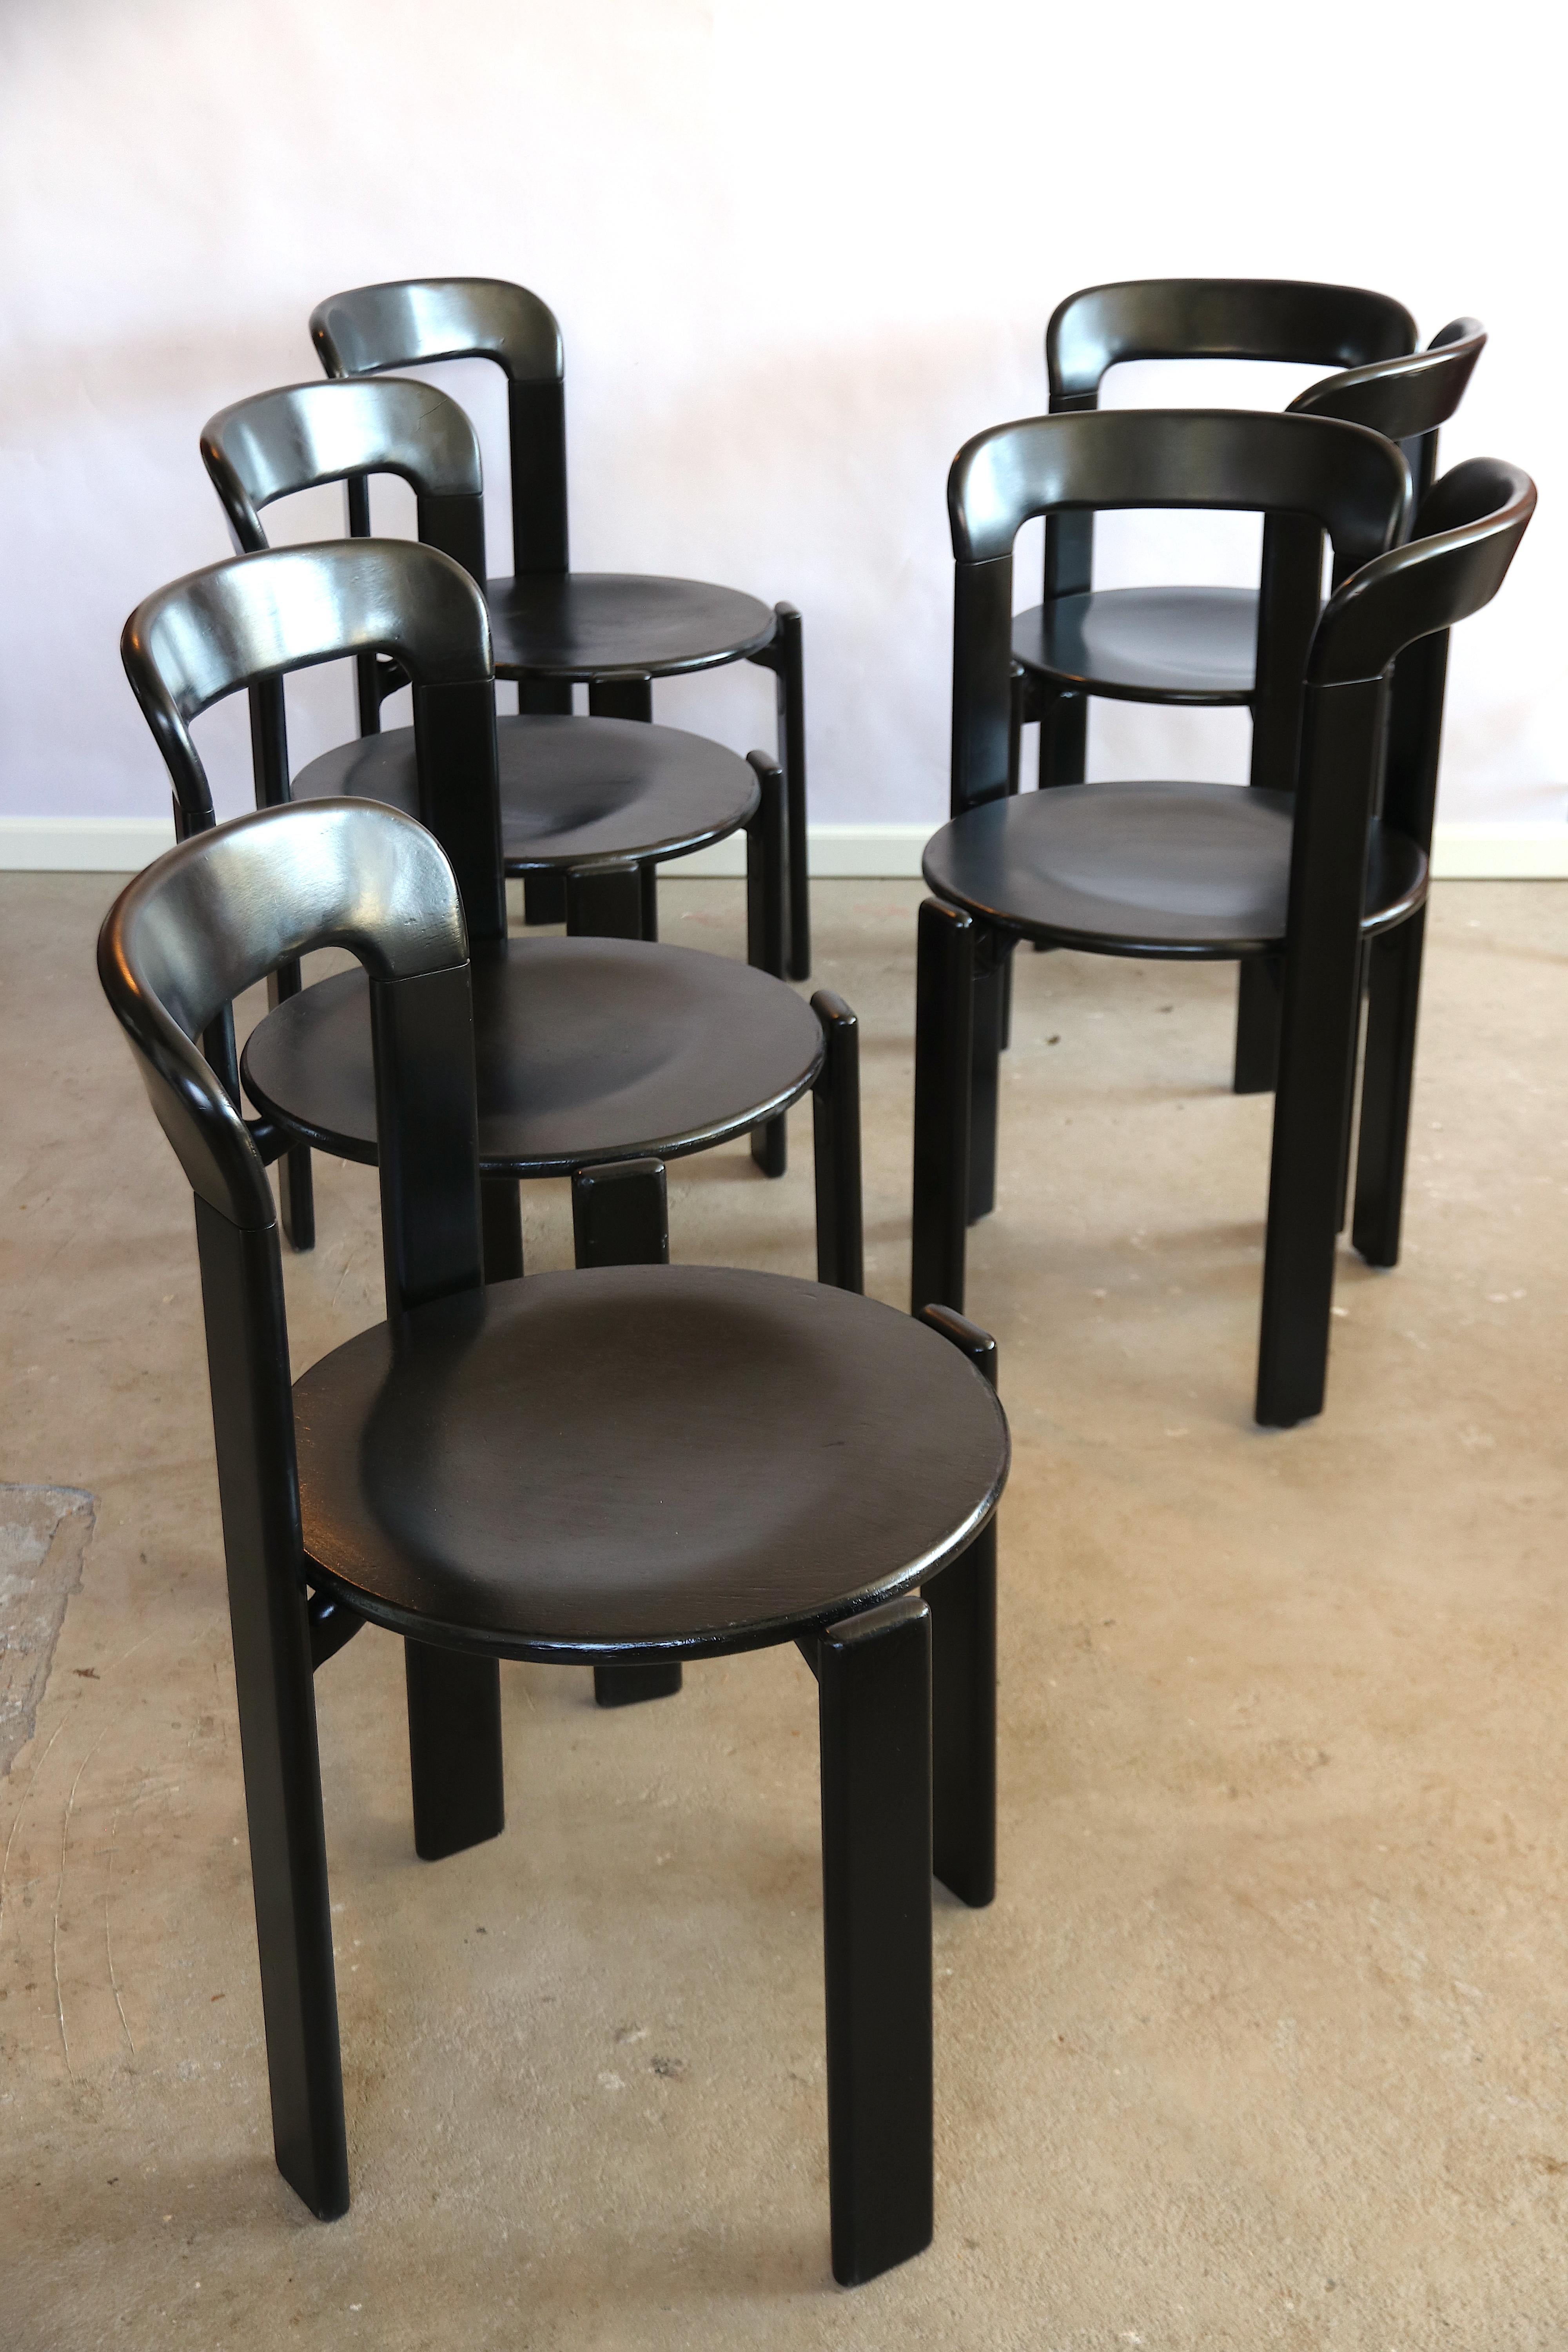 This is a beautiful set of the iconic ebonized black dining chairs by Bruno Rey for Dietiker, Switzerland.
In this set of 6 are 4 'normal' dining chairs and 2 ultra rare specimen of this model with the double backrest (to put at the short sides of a